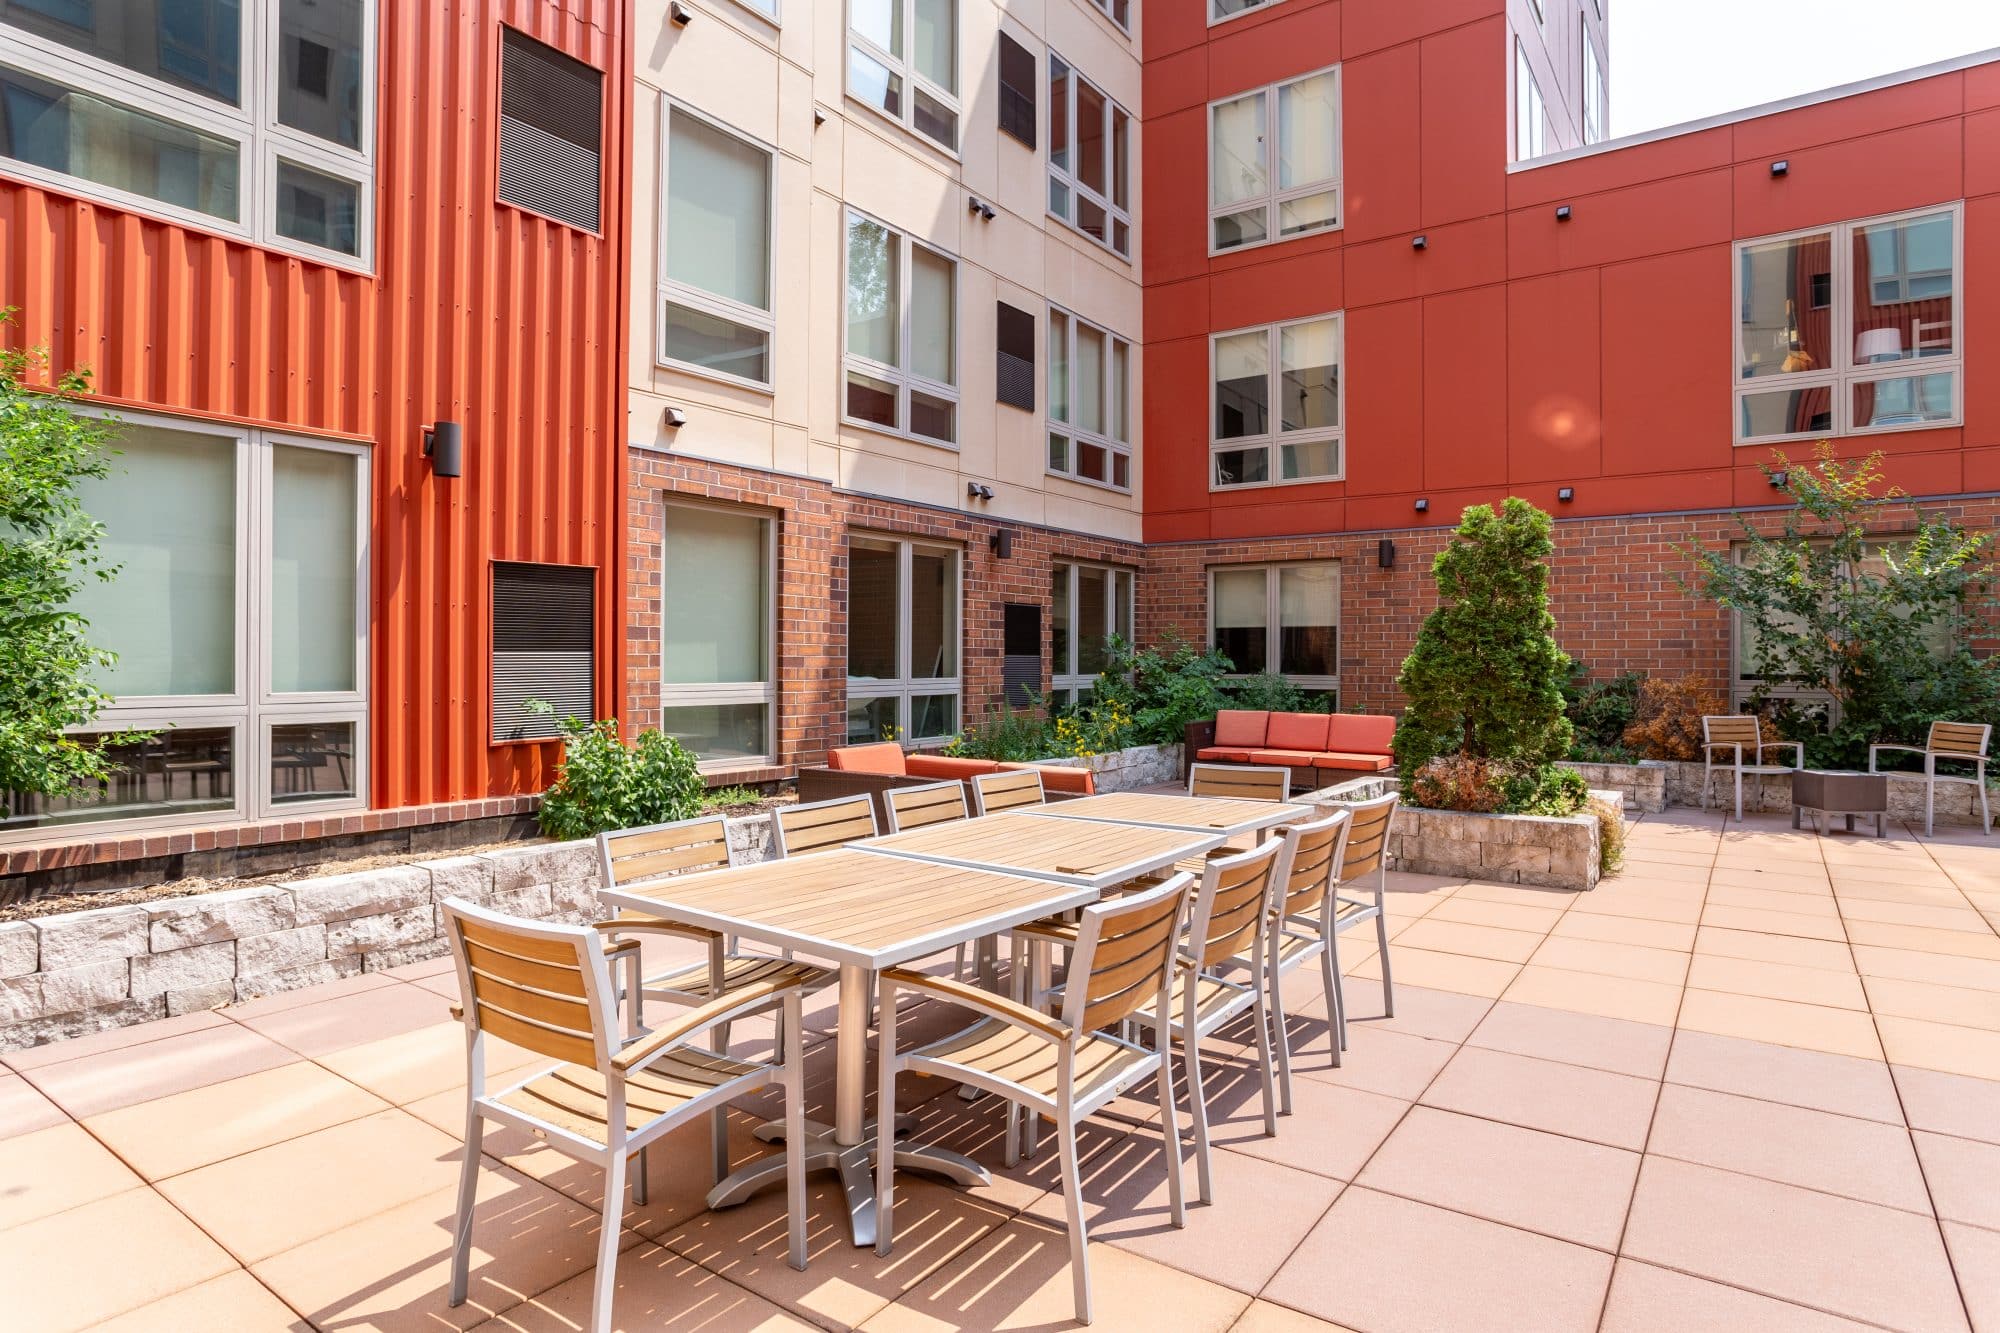 the knoll dinkytown off campus apartments near the university of minnesota courtyard outdoor entertainment space